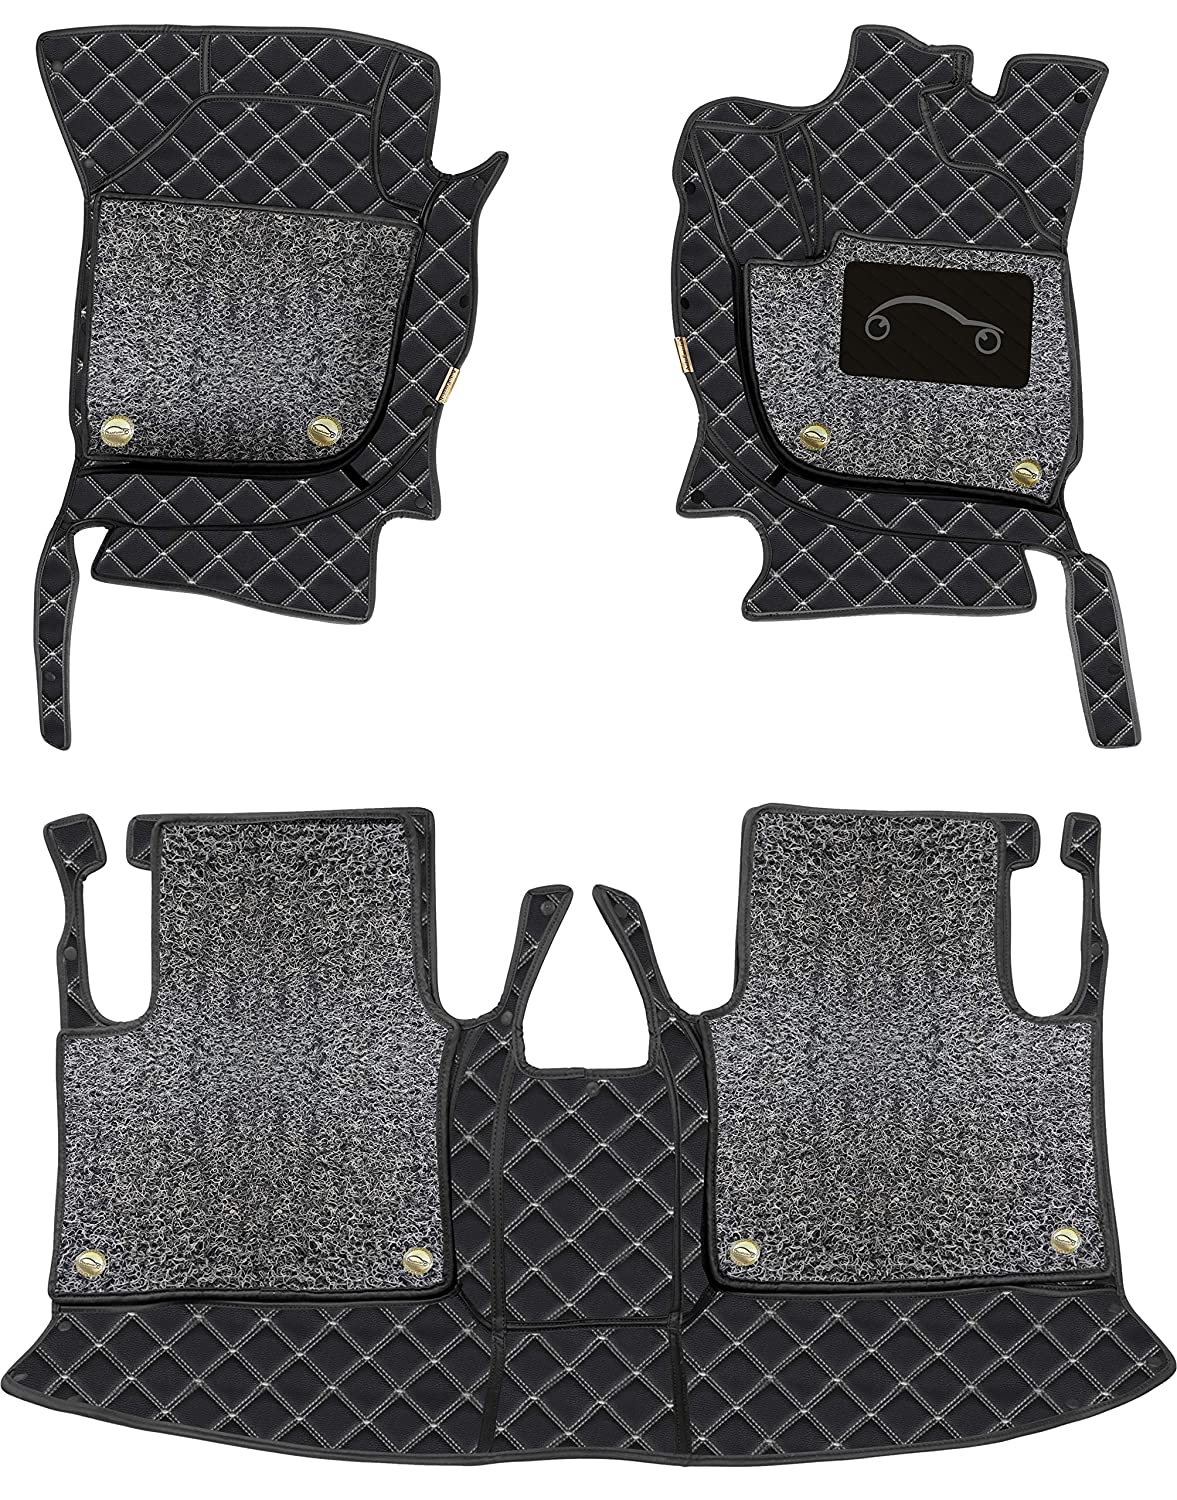 Volkswagen Vento (Auto) 2014 7D Luxury Car Mat, All Weather Proof, Anti-Skid, 100% Waterproof & Odorless with Unique Diamond Fish Design (24mm Luxury PU Leather, 2 Rows)